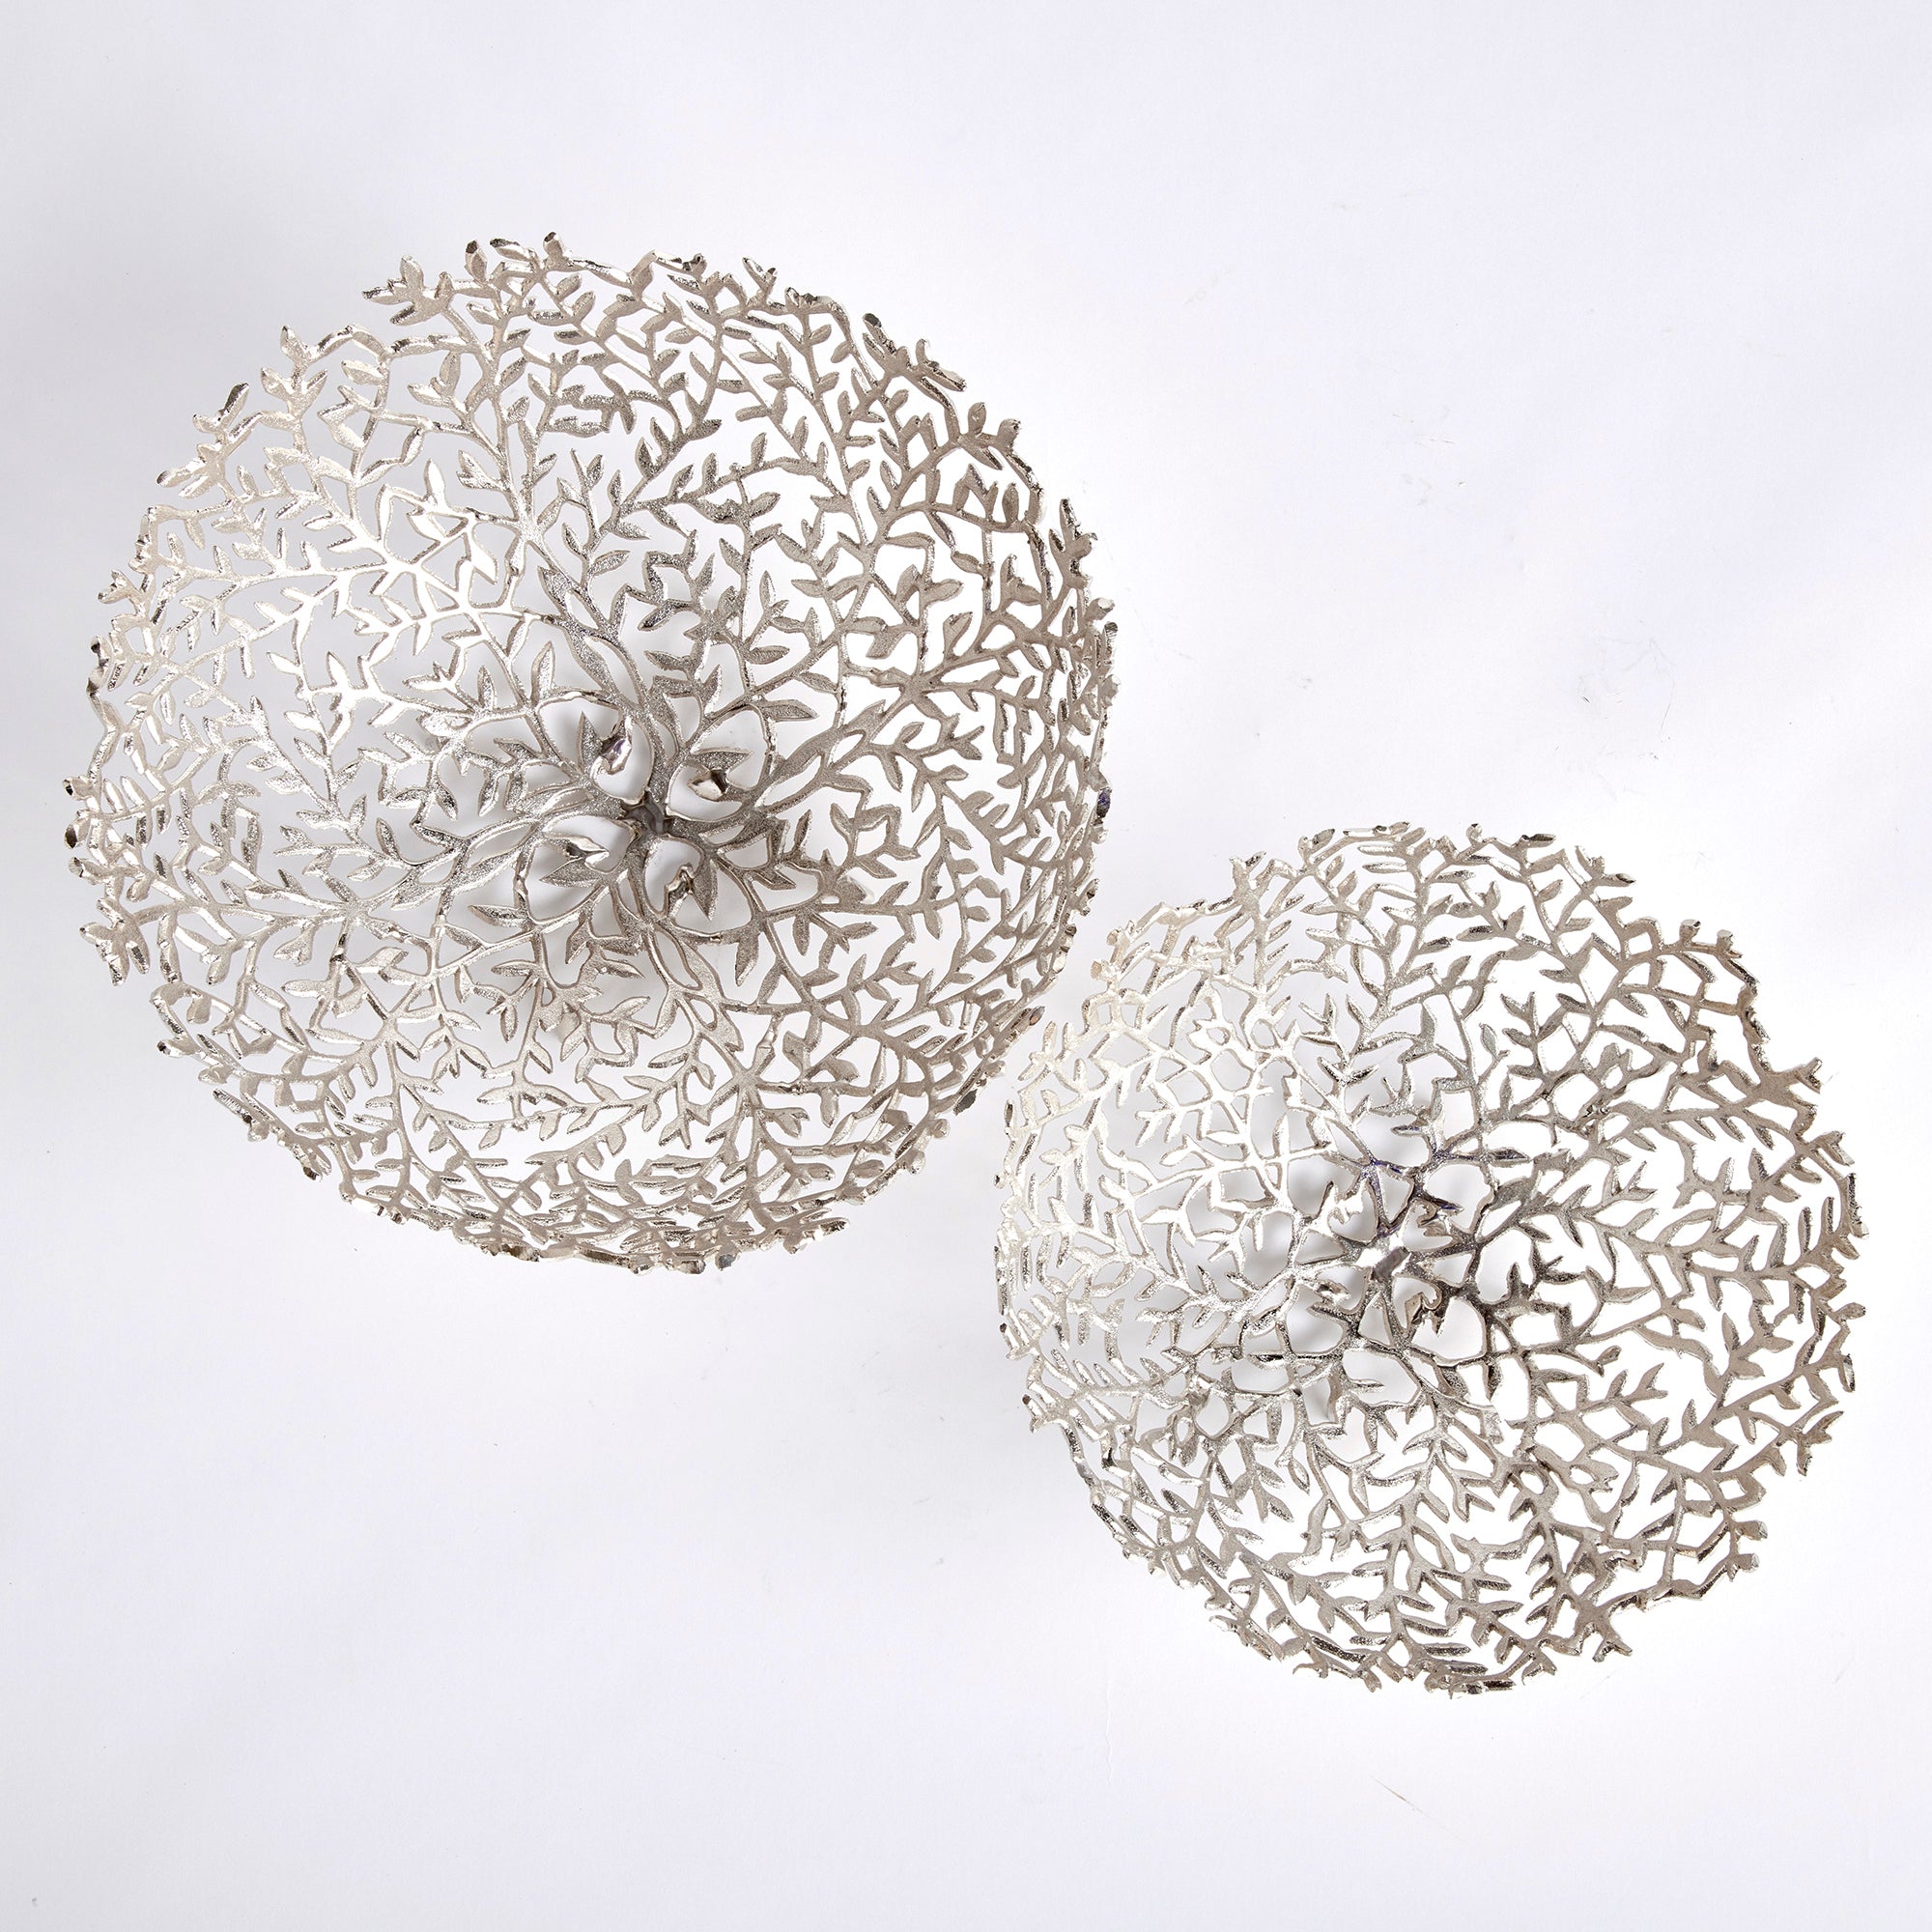 Light flowing vines make up the composition of this pair of silver decorative bowls. Fill with natural green orbs, or display as is for a clean, sophisticated look. Amethyst Home provides interior design, new construction, custom furniture, and area rugs in the Alpharetta metro area.